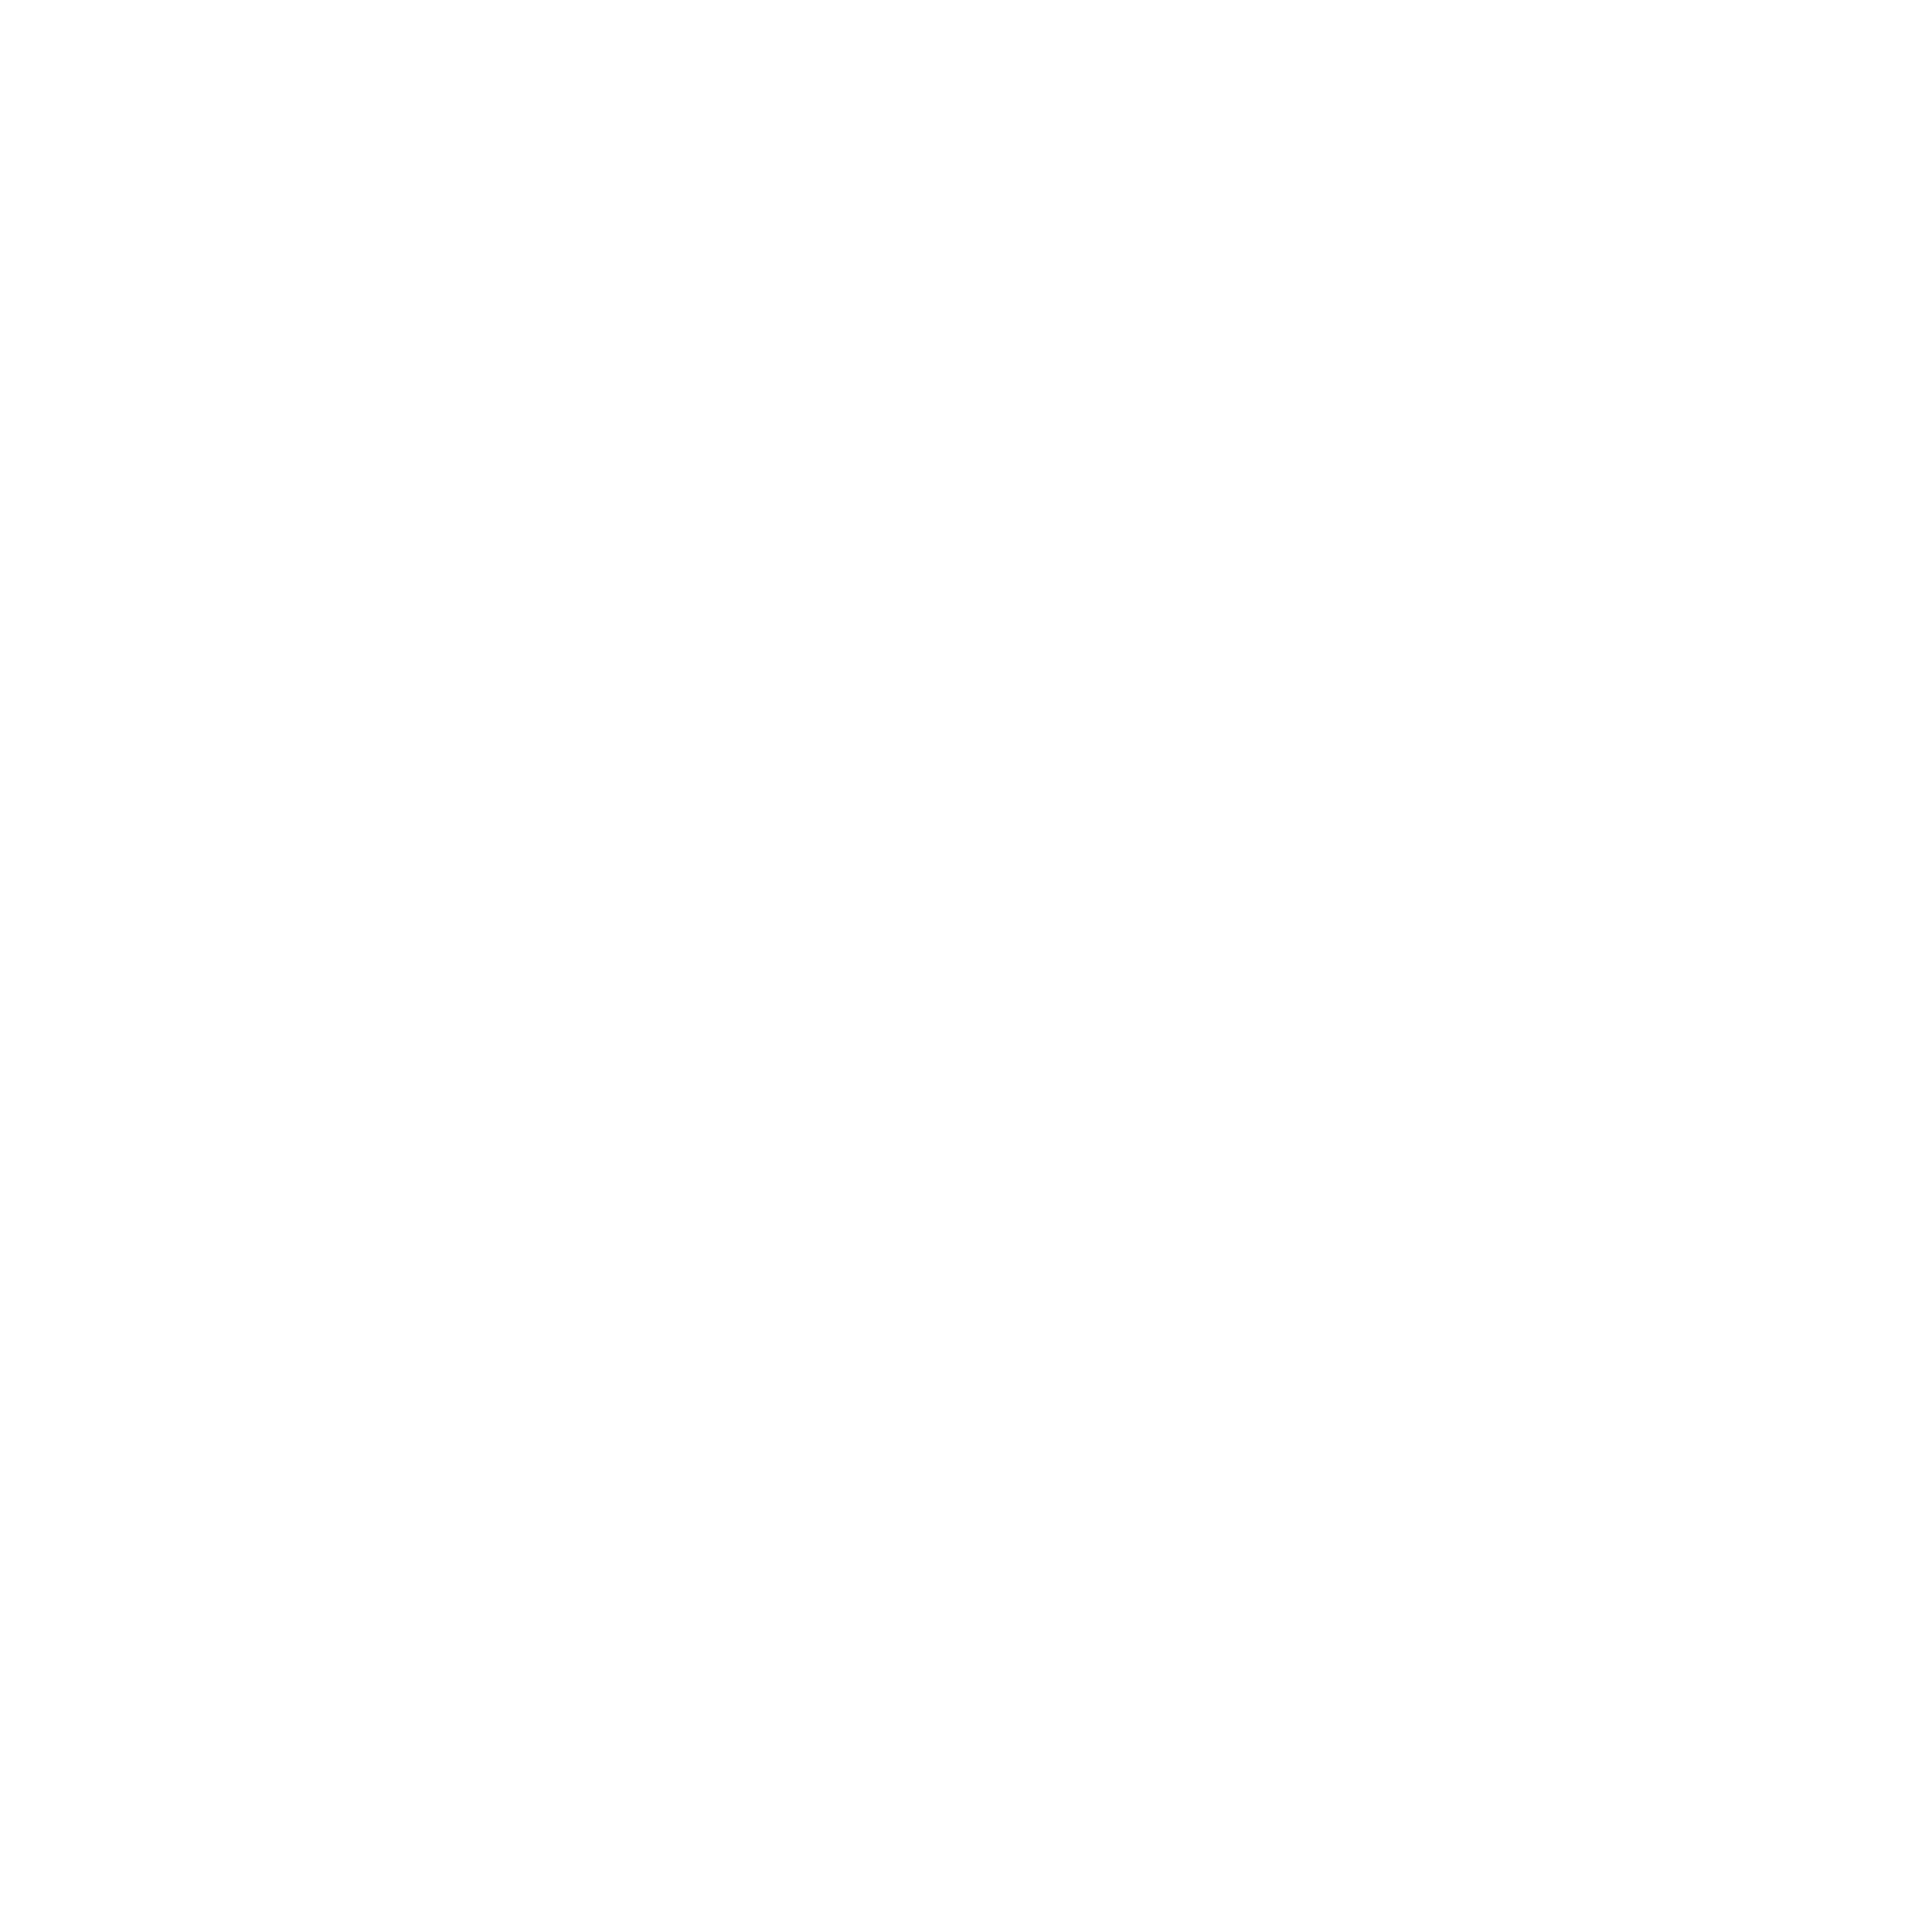 The Face Centre